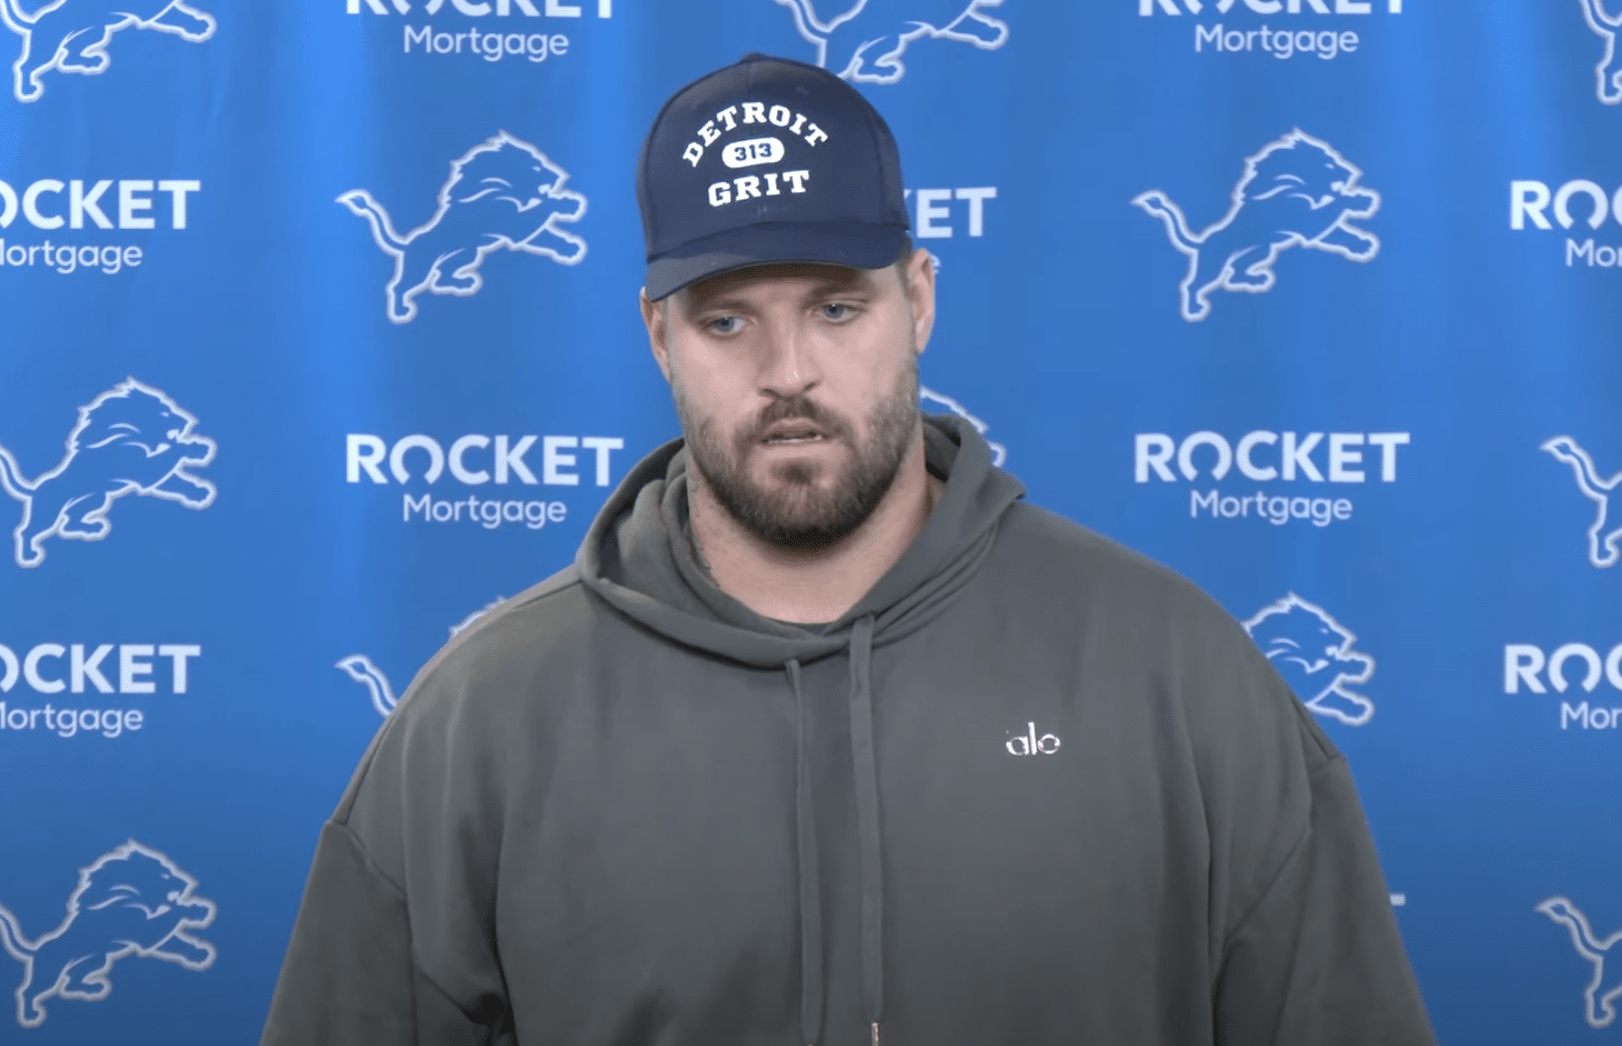 Taylor Decker cries tears of joy Detroit Lions may have tipped play call Taylor Decker does not mince words Taylor Decker breaks down in tears